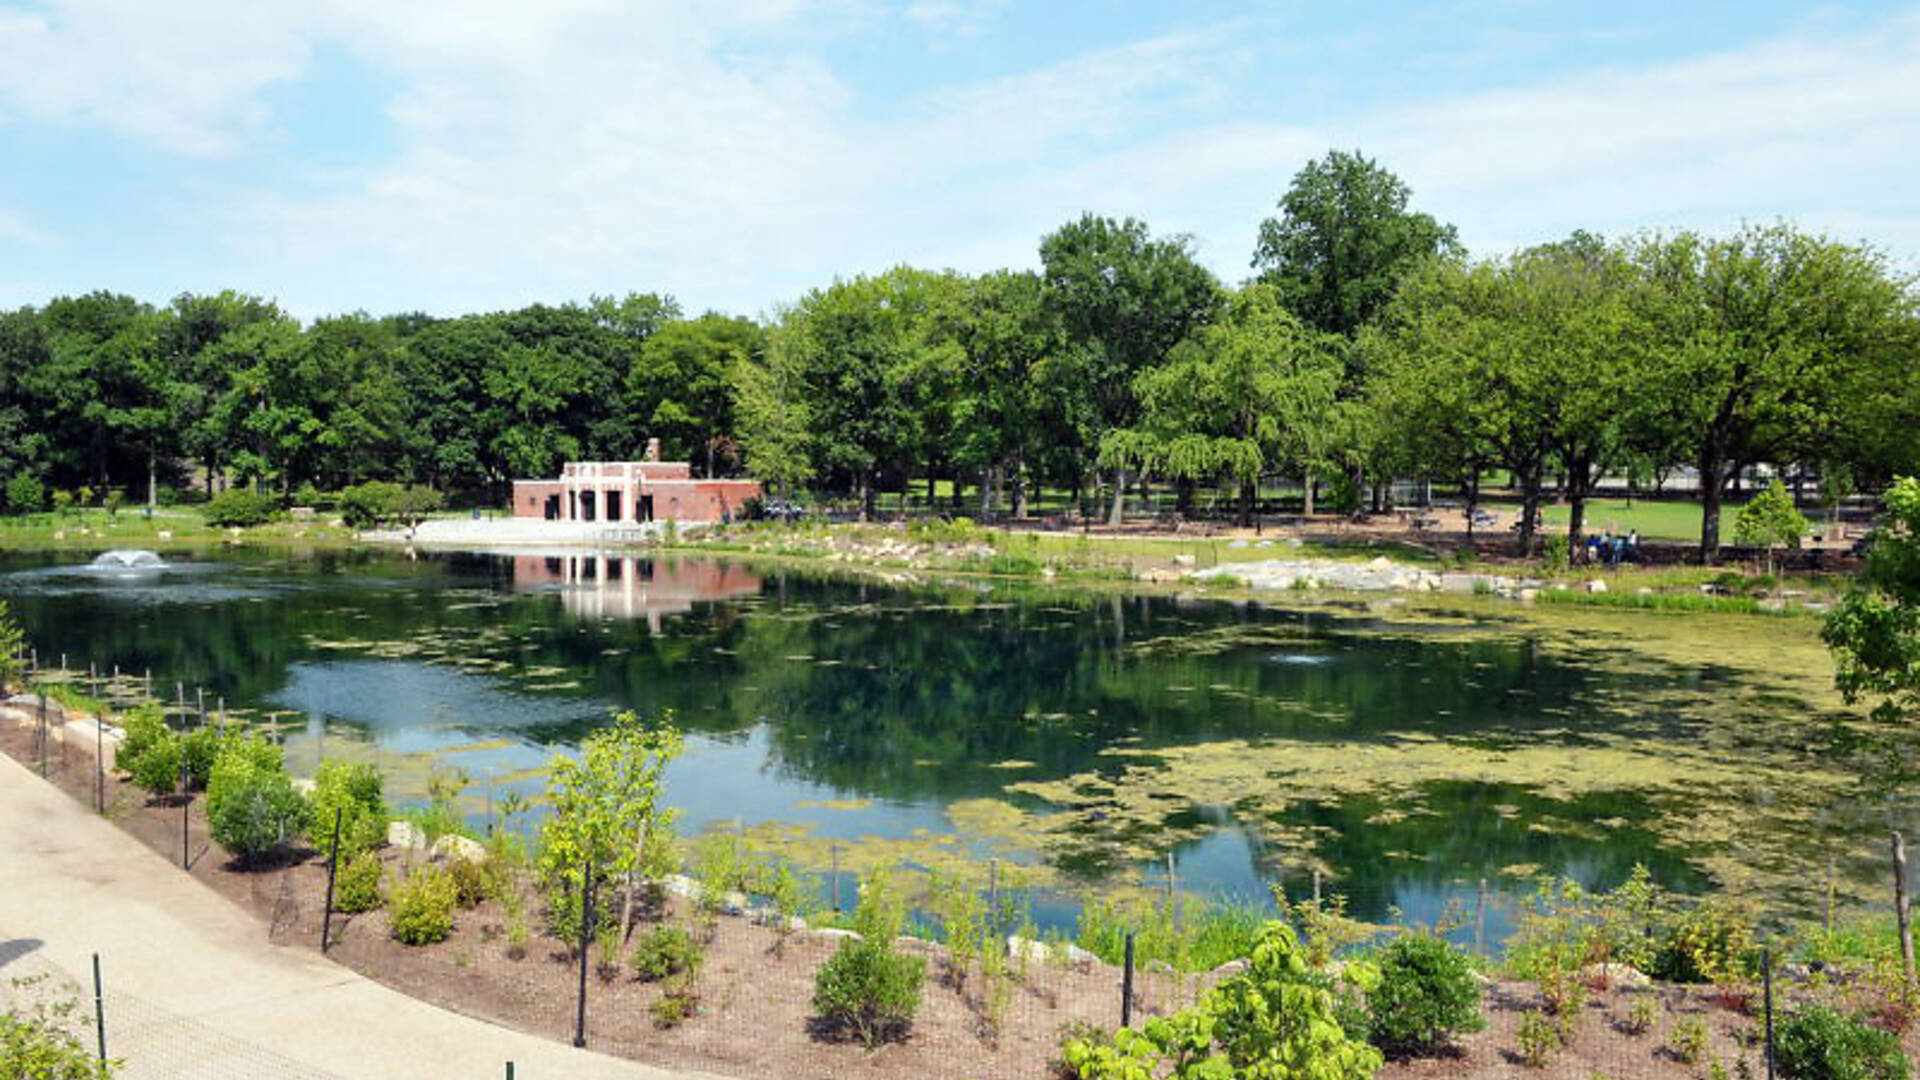 Crotona Park Attractions in The Bronx, New York